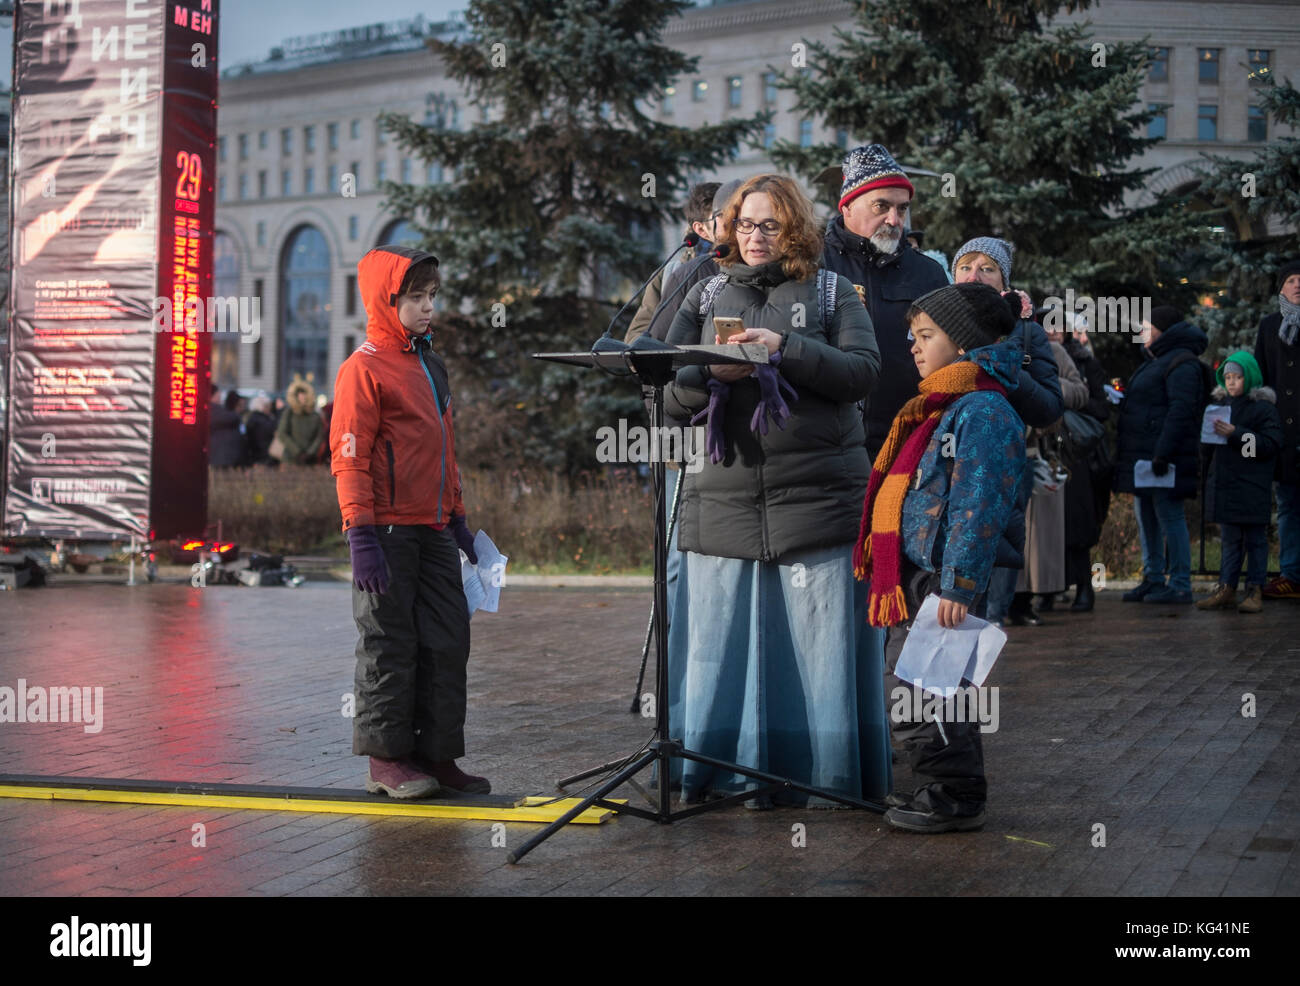 More than 5,000 people took part in a ceremony in Moscow's Lubyanka Square on October 29, 2017, to commemorate the victims of political terror during the Communist era. For twelve hours, people read names of those who were killled or disappeared, especially at the height of Stalinist terror in 1937-1938. In Moscow alone, more than 30,000 people were murdered. Reading the names of the victims has become an annual tradition since 2007. Stock Photo